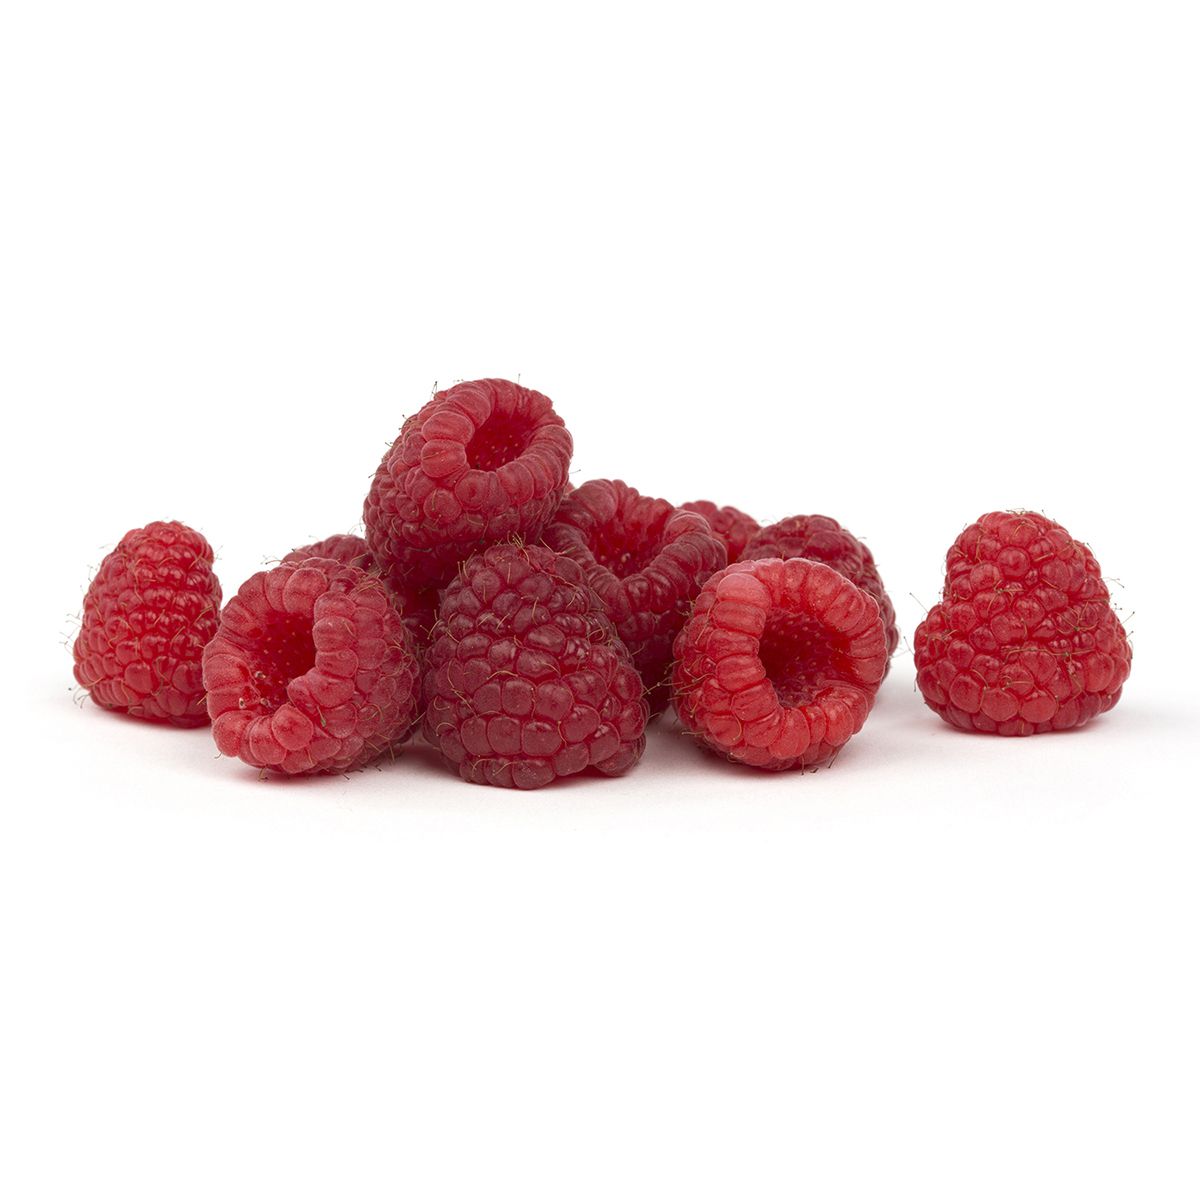 Driscoll'S Limited Edition Sweetest Batch Raspberries 6 OZ